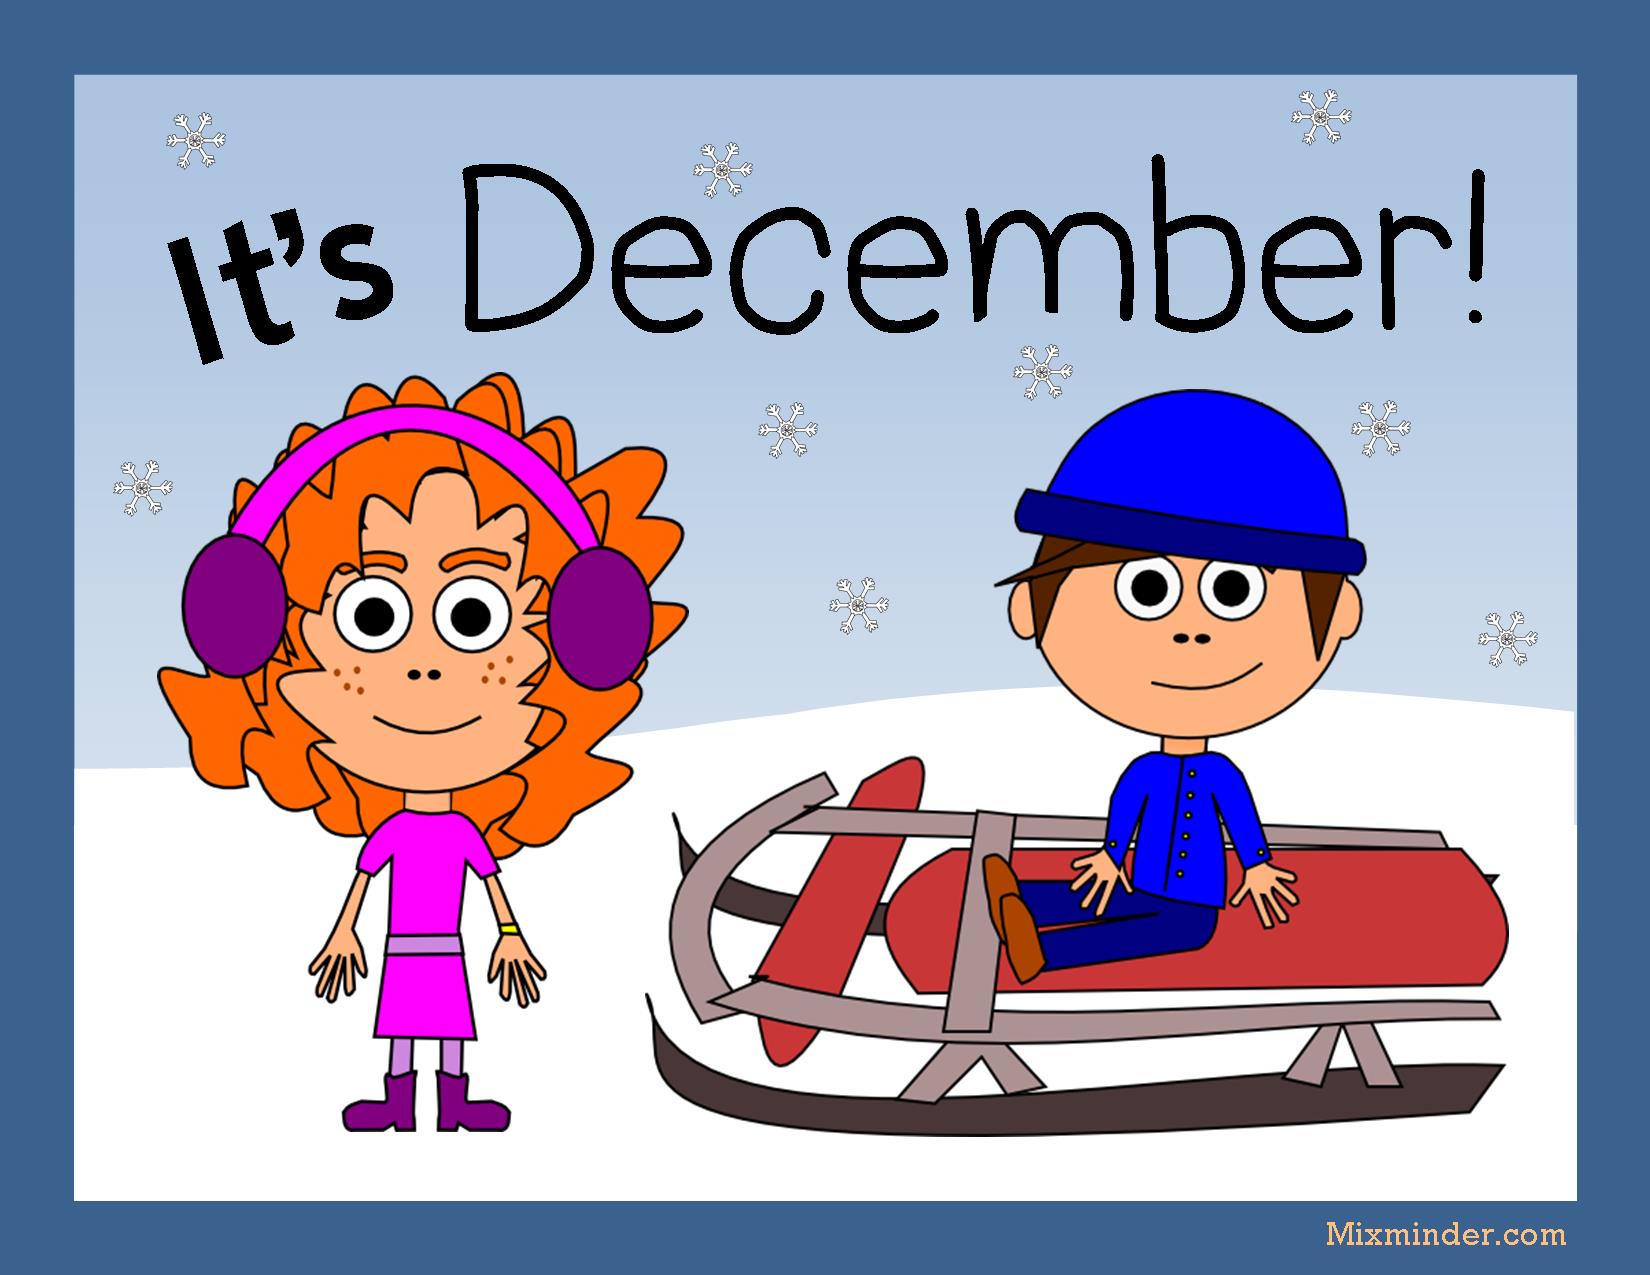 December is here… and winter is coming!